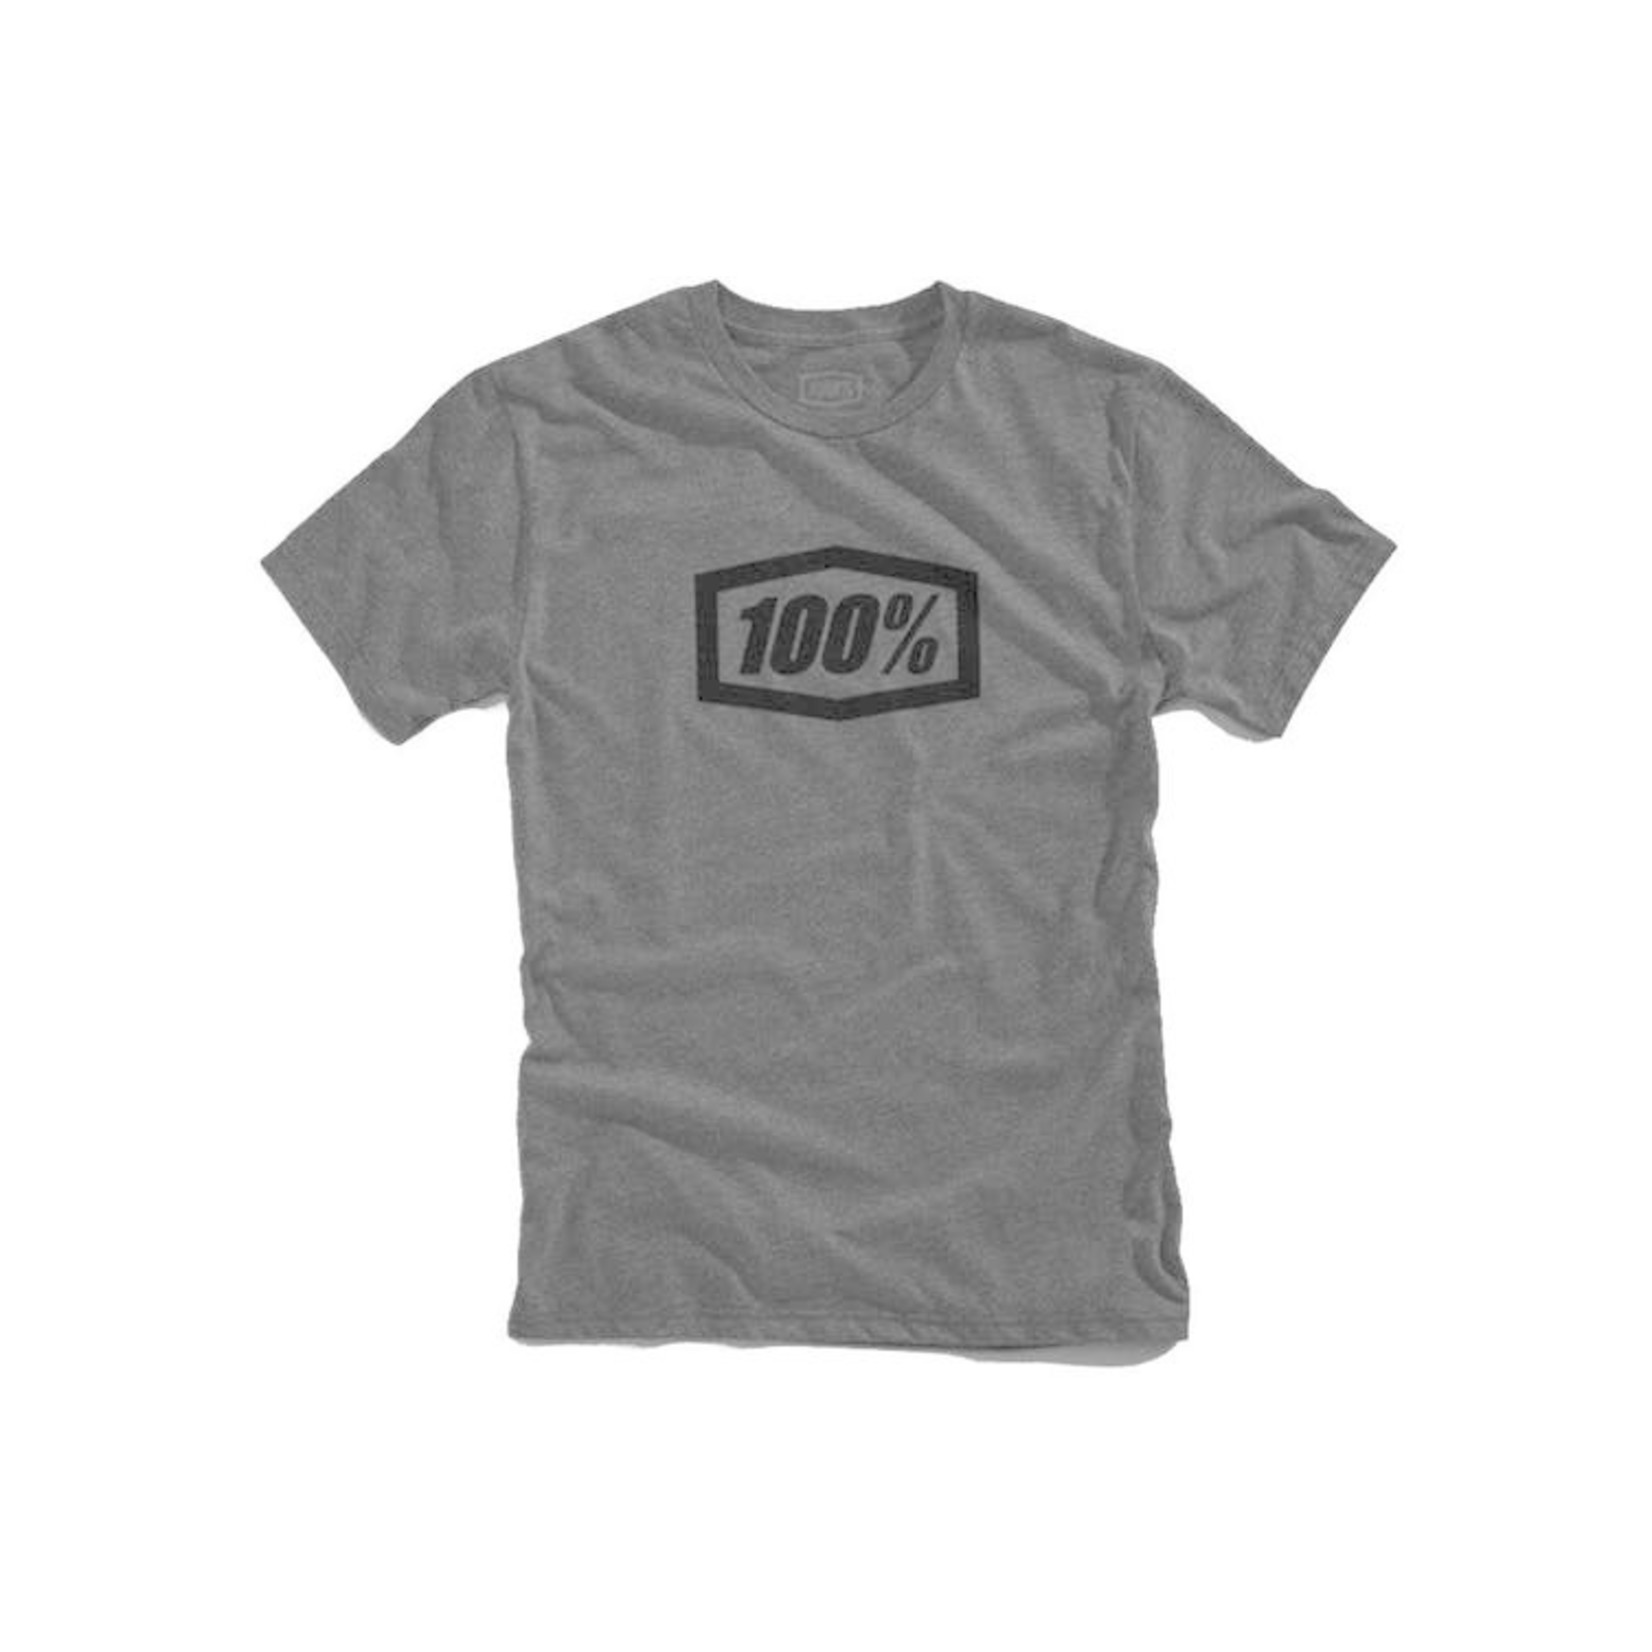 FE sports 100% Essential 100% Comfort And Style T-Shirt - Dark Grey